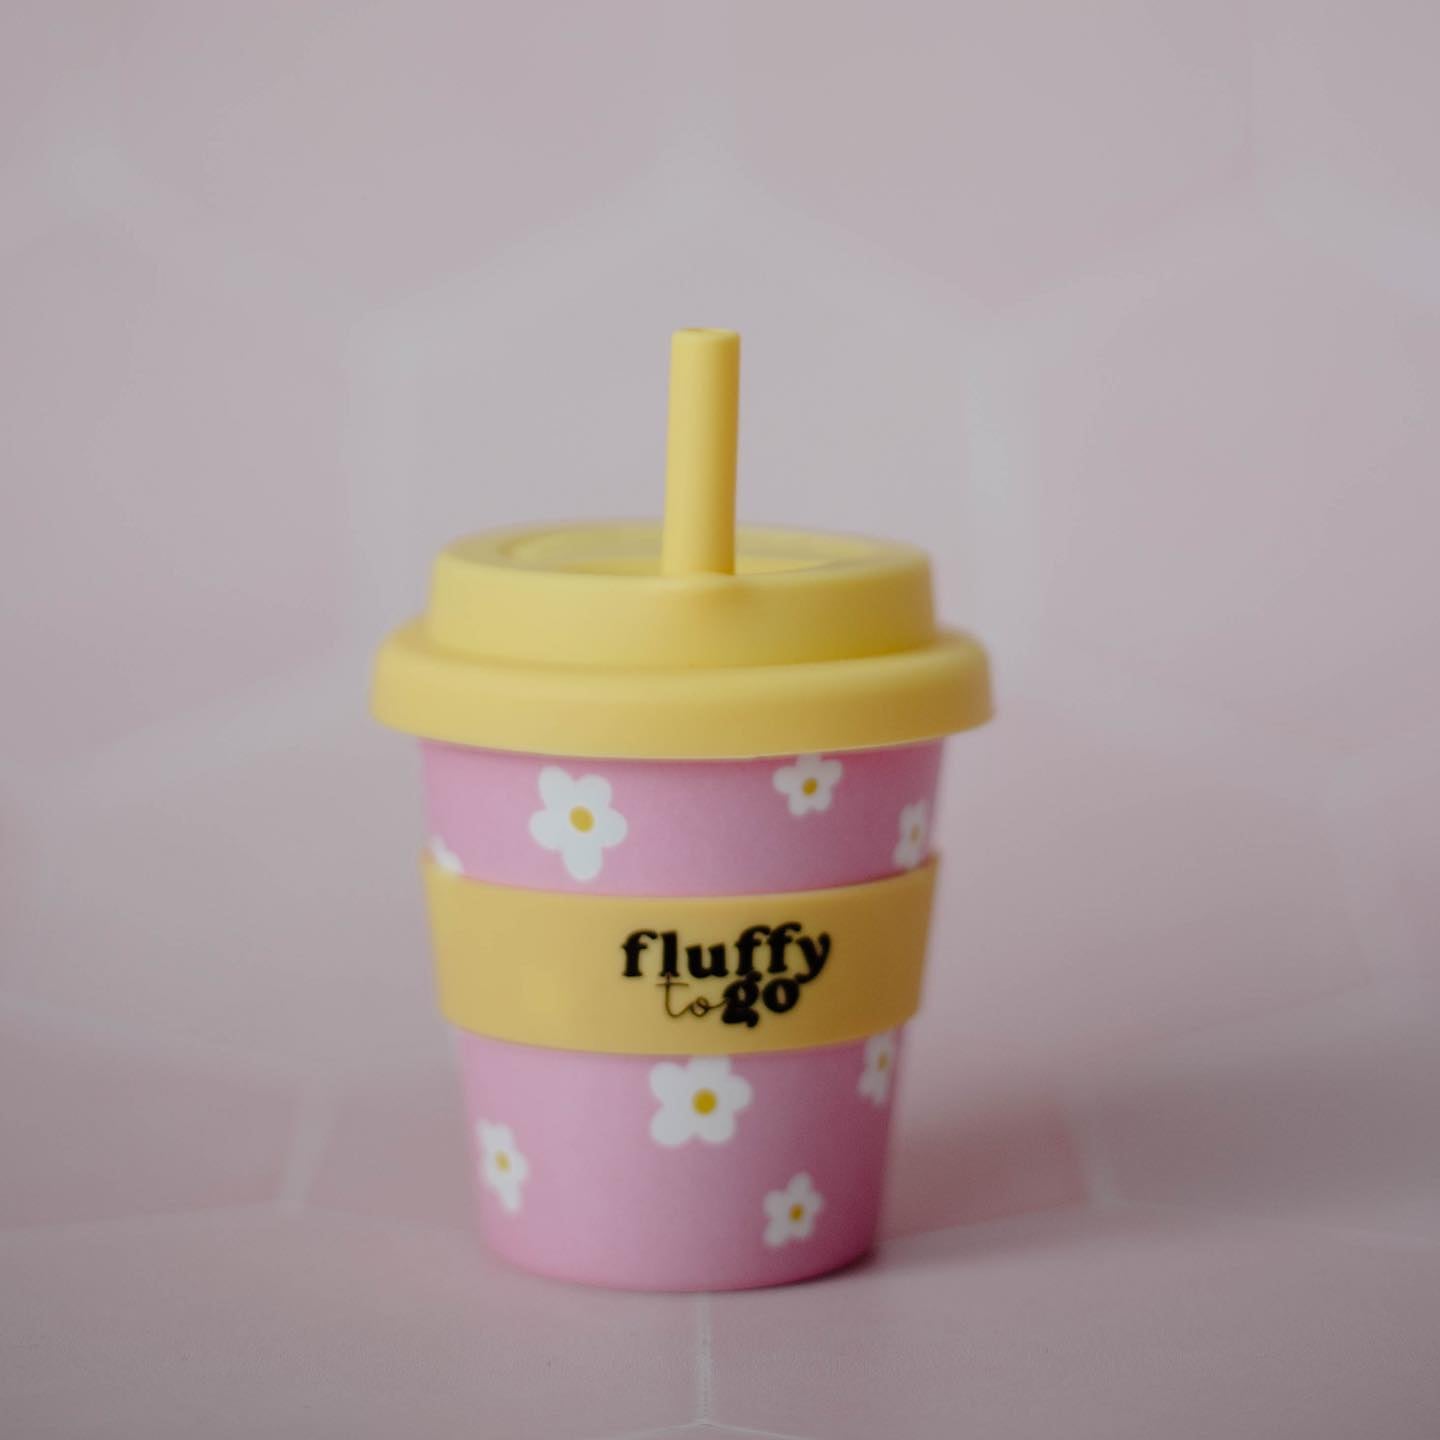 Fluffy To Go Cup | Reusable Mug in Classic Daisy available at Bear & Moo